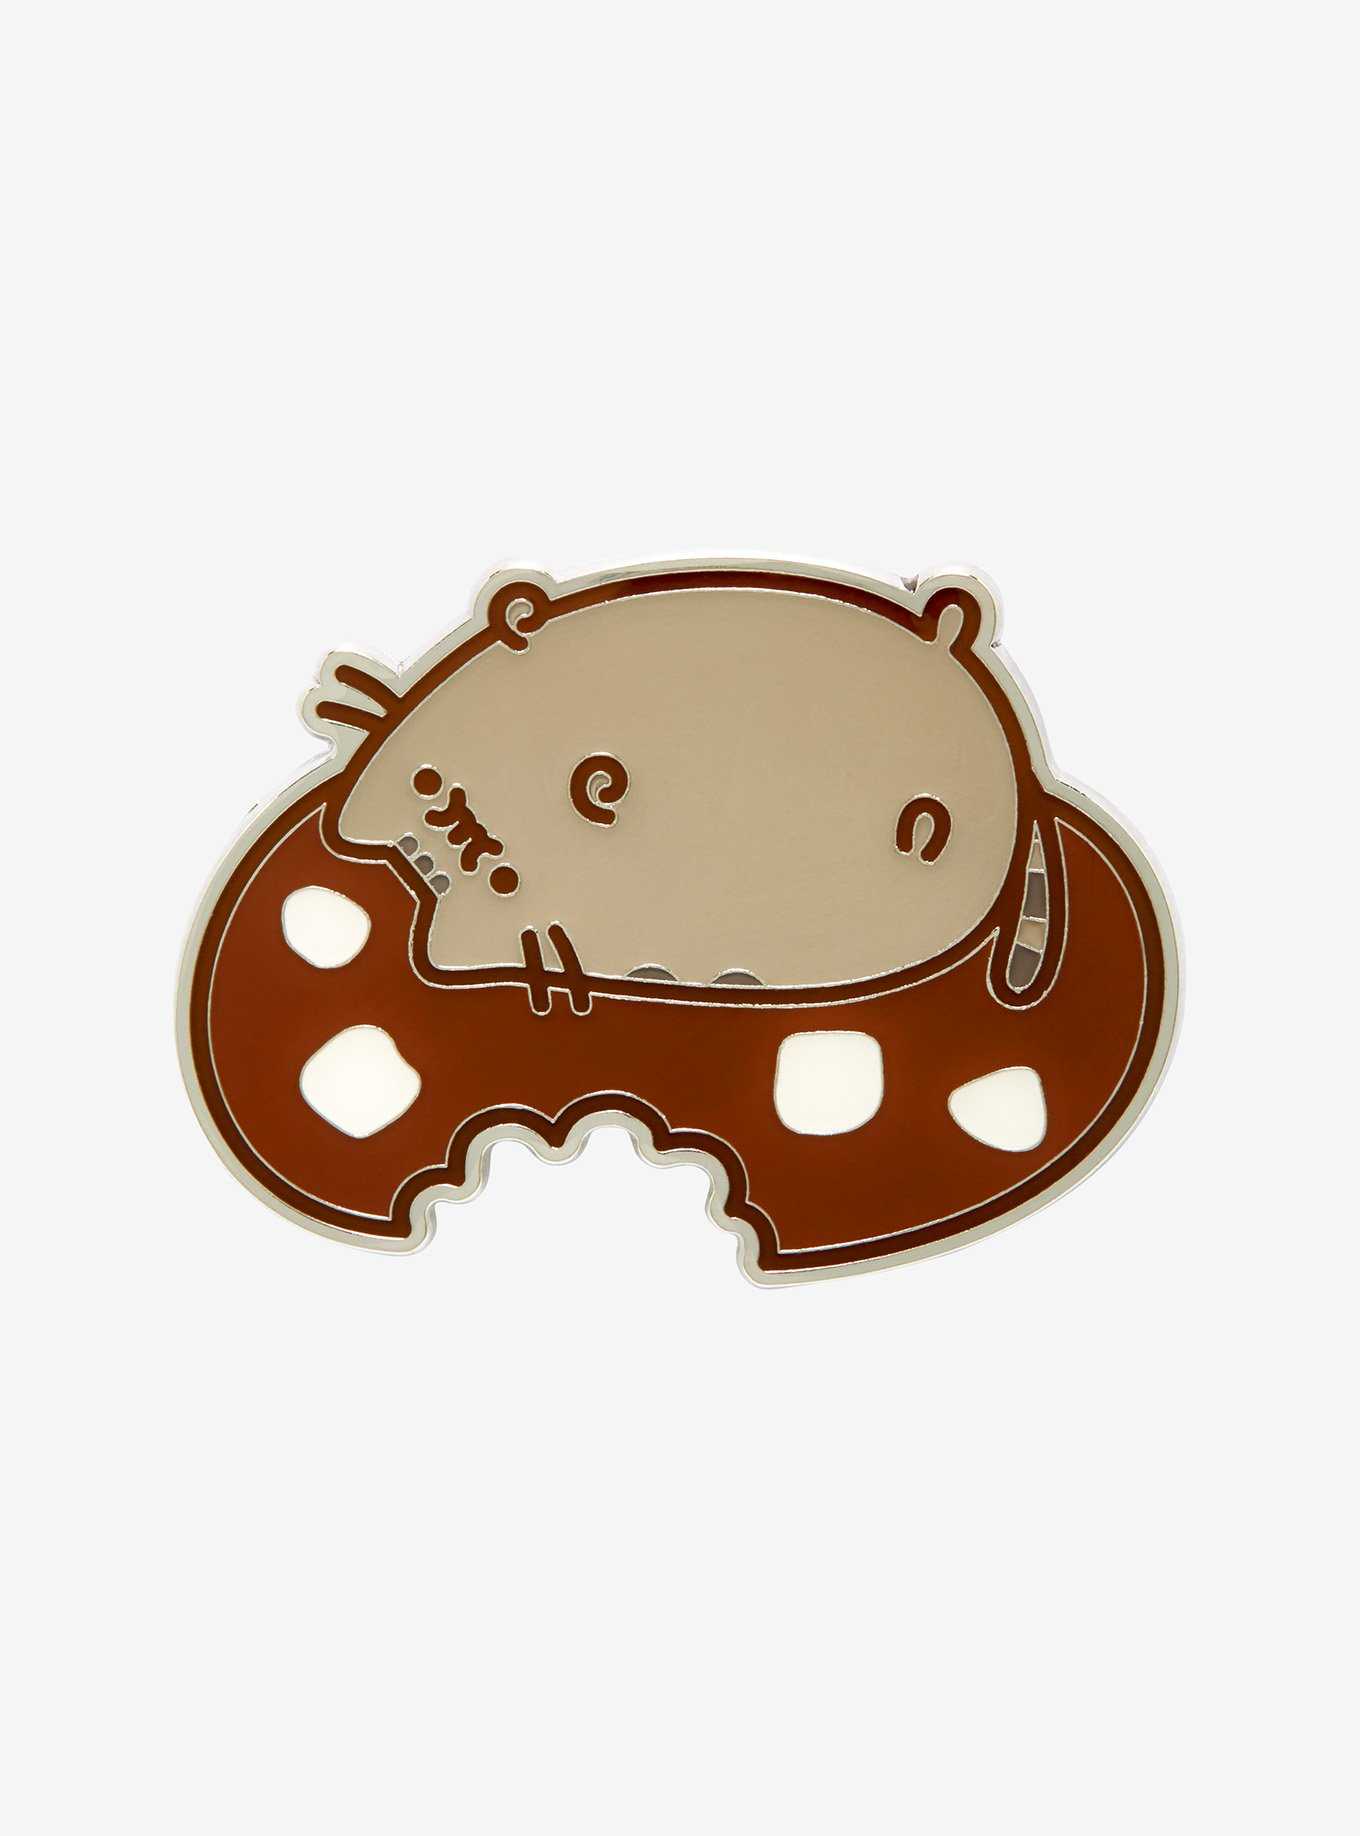 Official Pusheen Stickers: Buy Online on Offer